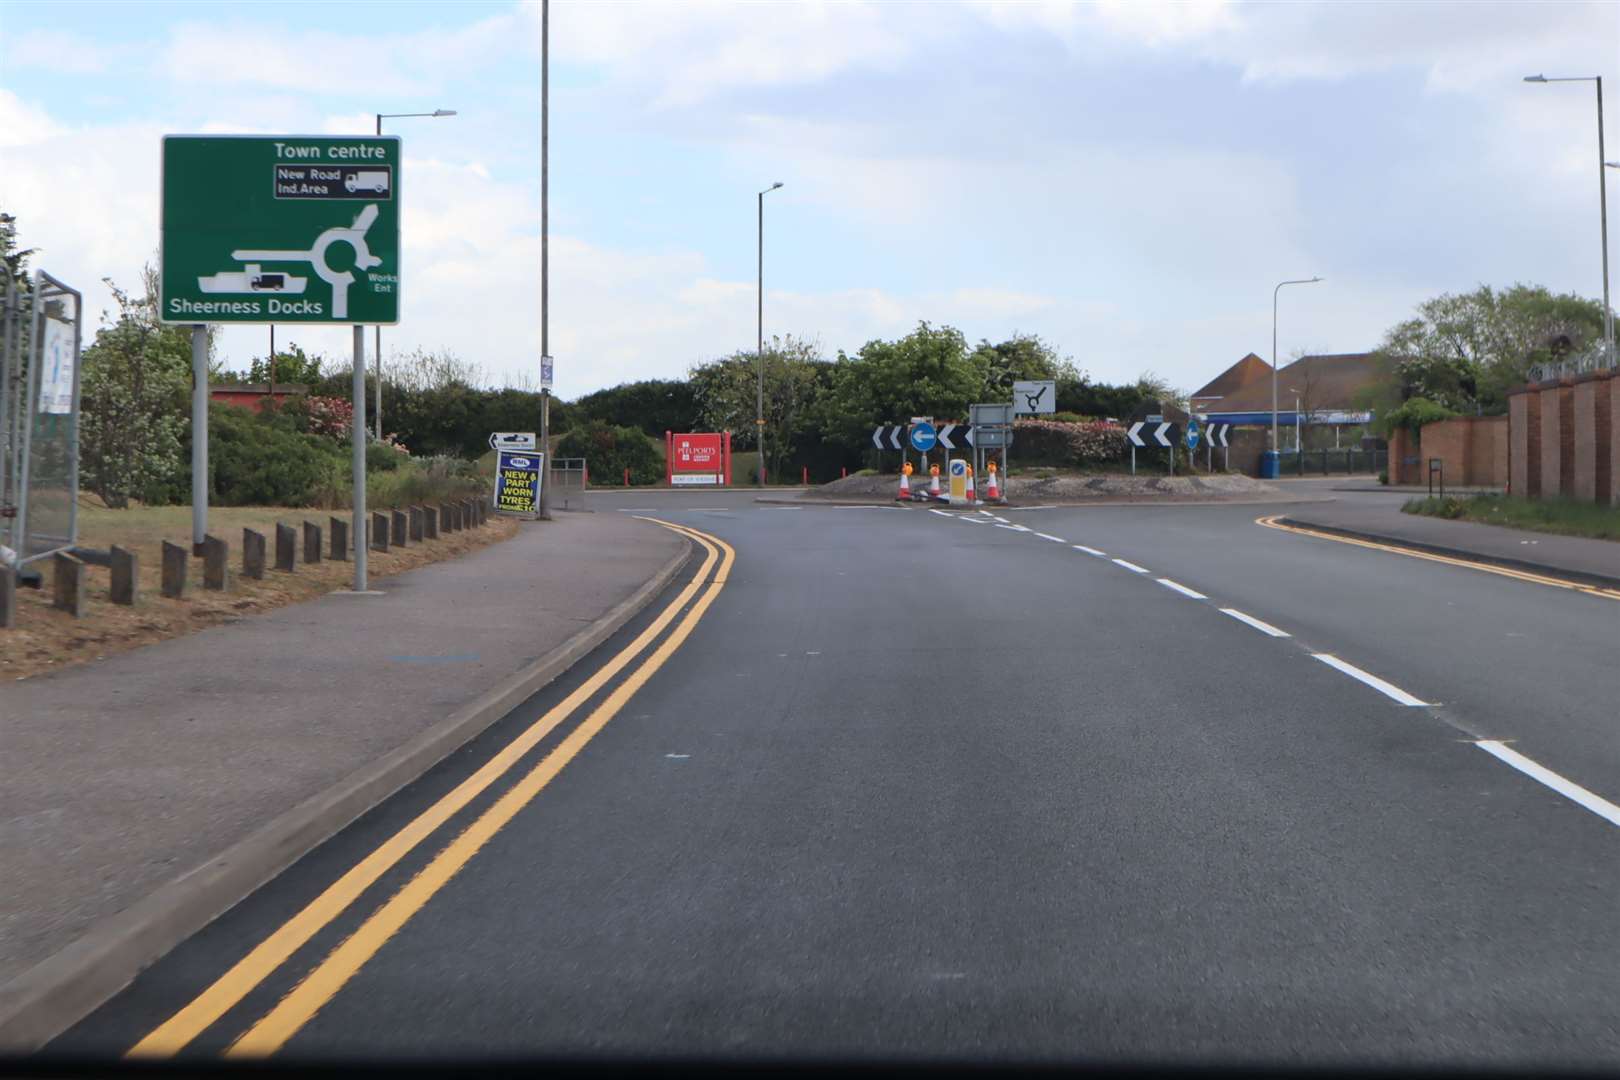 The resurfaced Brielle Way at Blue Town, Sheerness, on the Isle of Sheppey